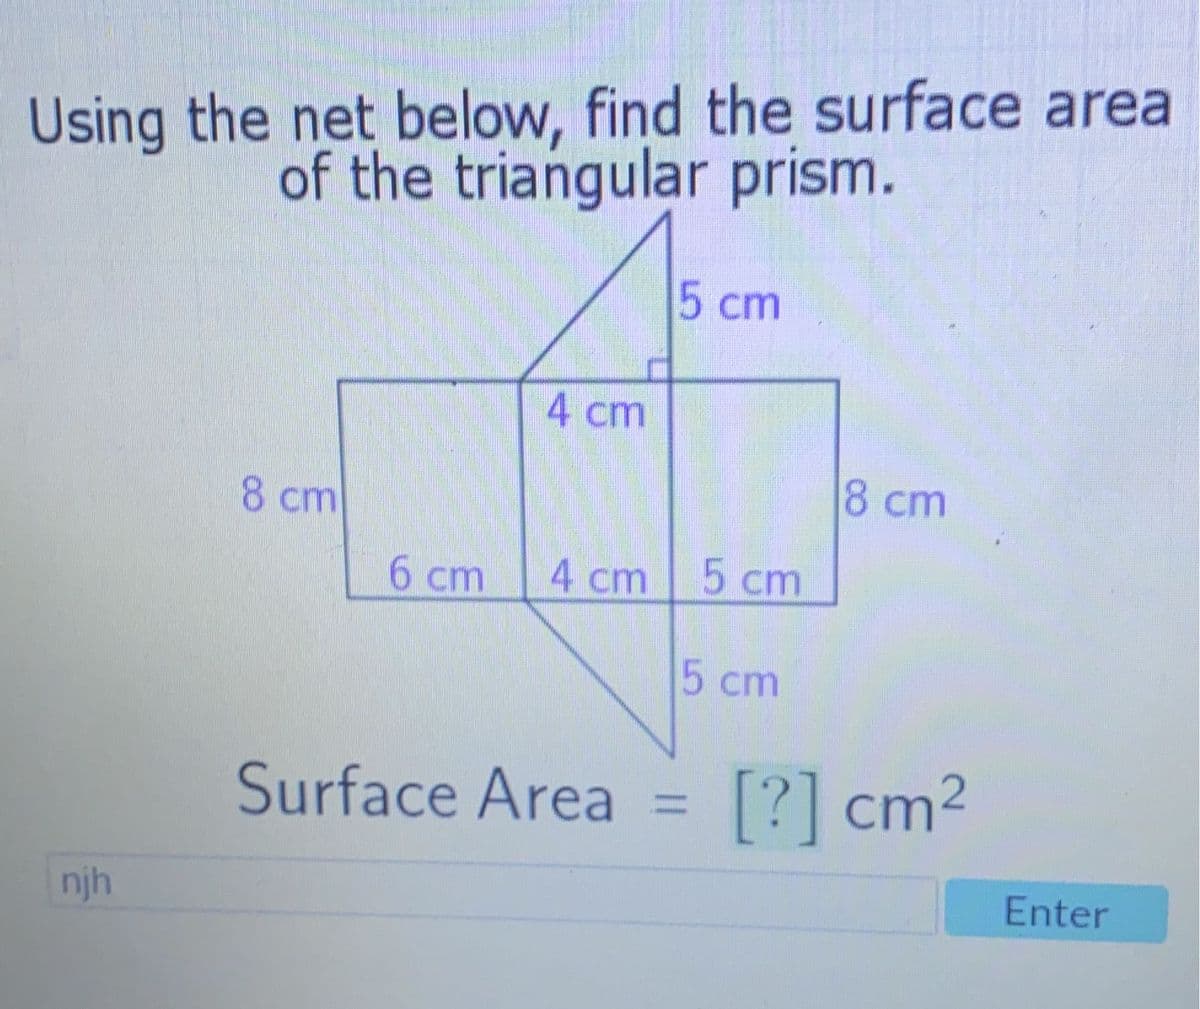 Using the net below, find the surface area
of the triangular prism.
5 cm
4 cm
8 cm
8 cm
6 cm
4 cm
5 cm
Surface Area = [?] cm²
njh
5 cm
Enter